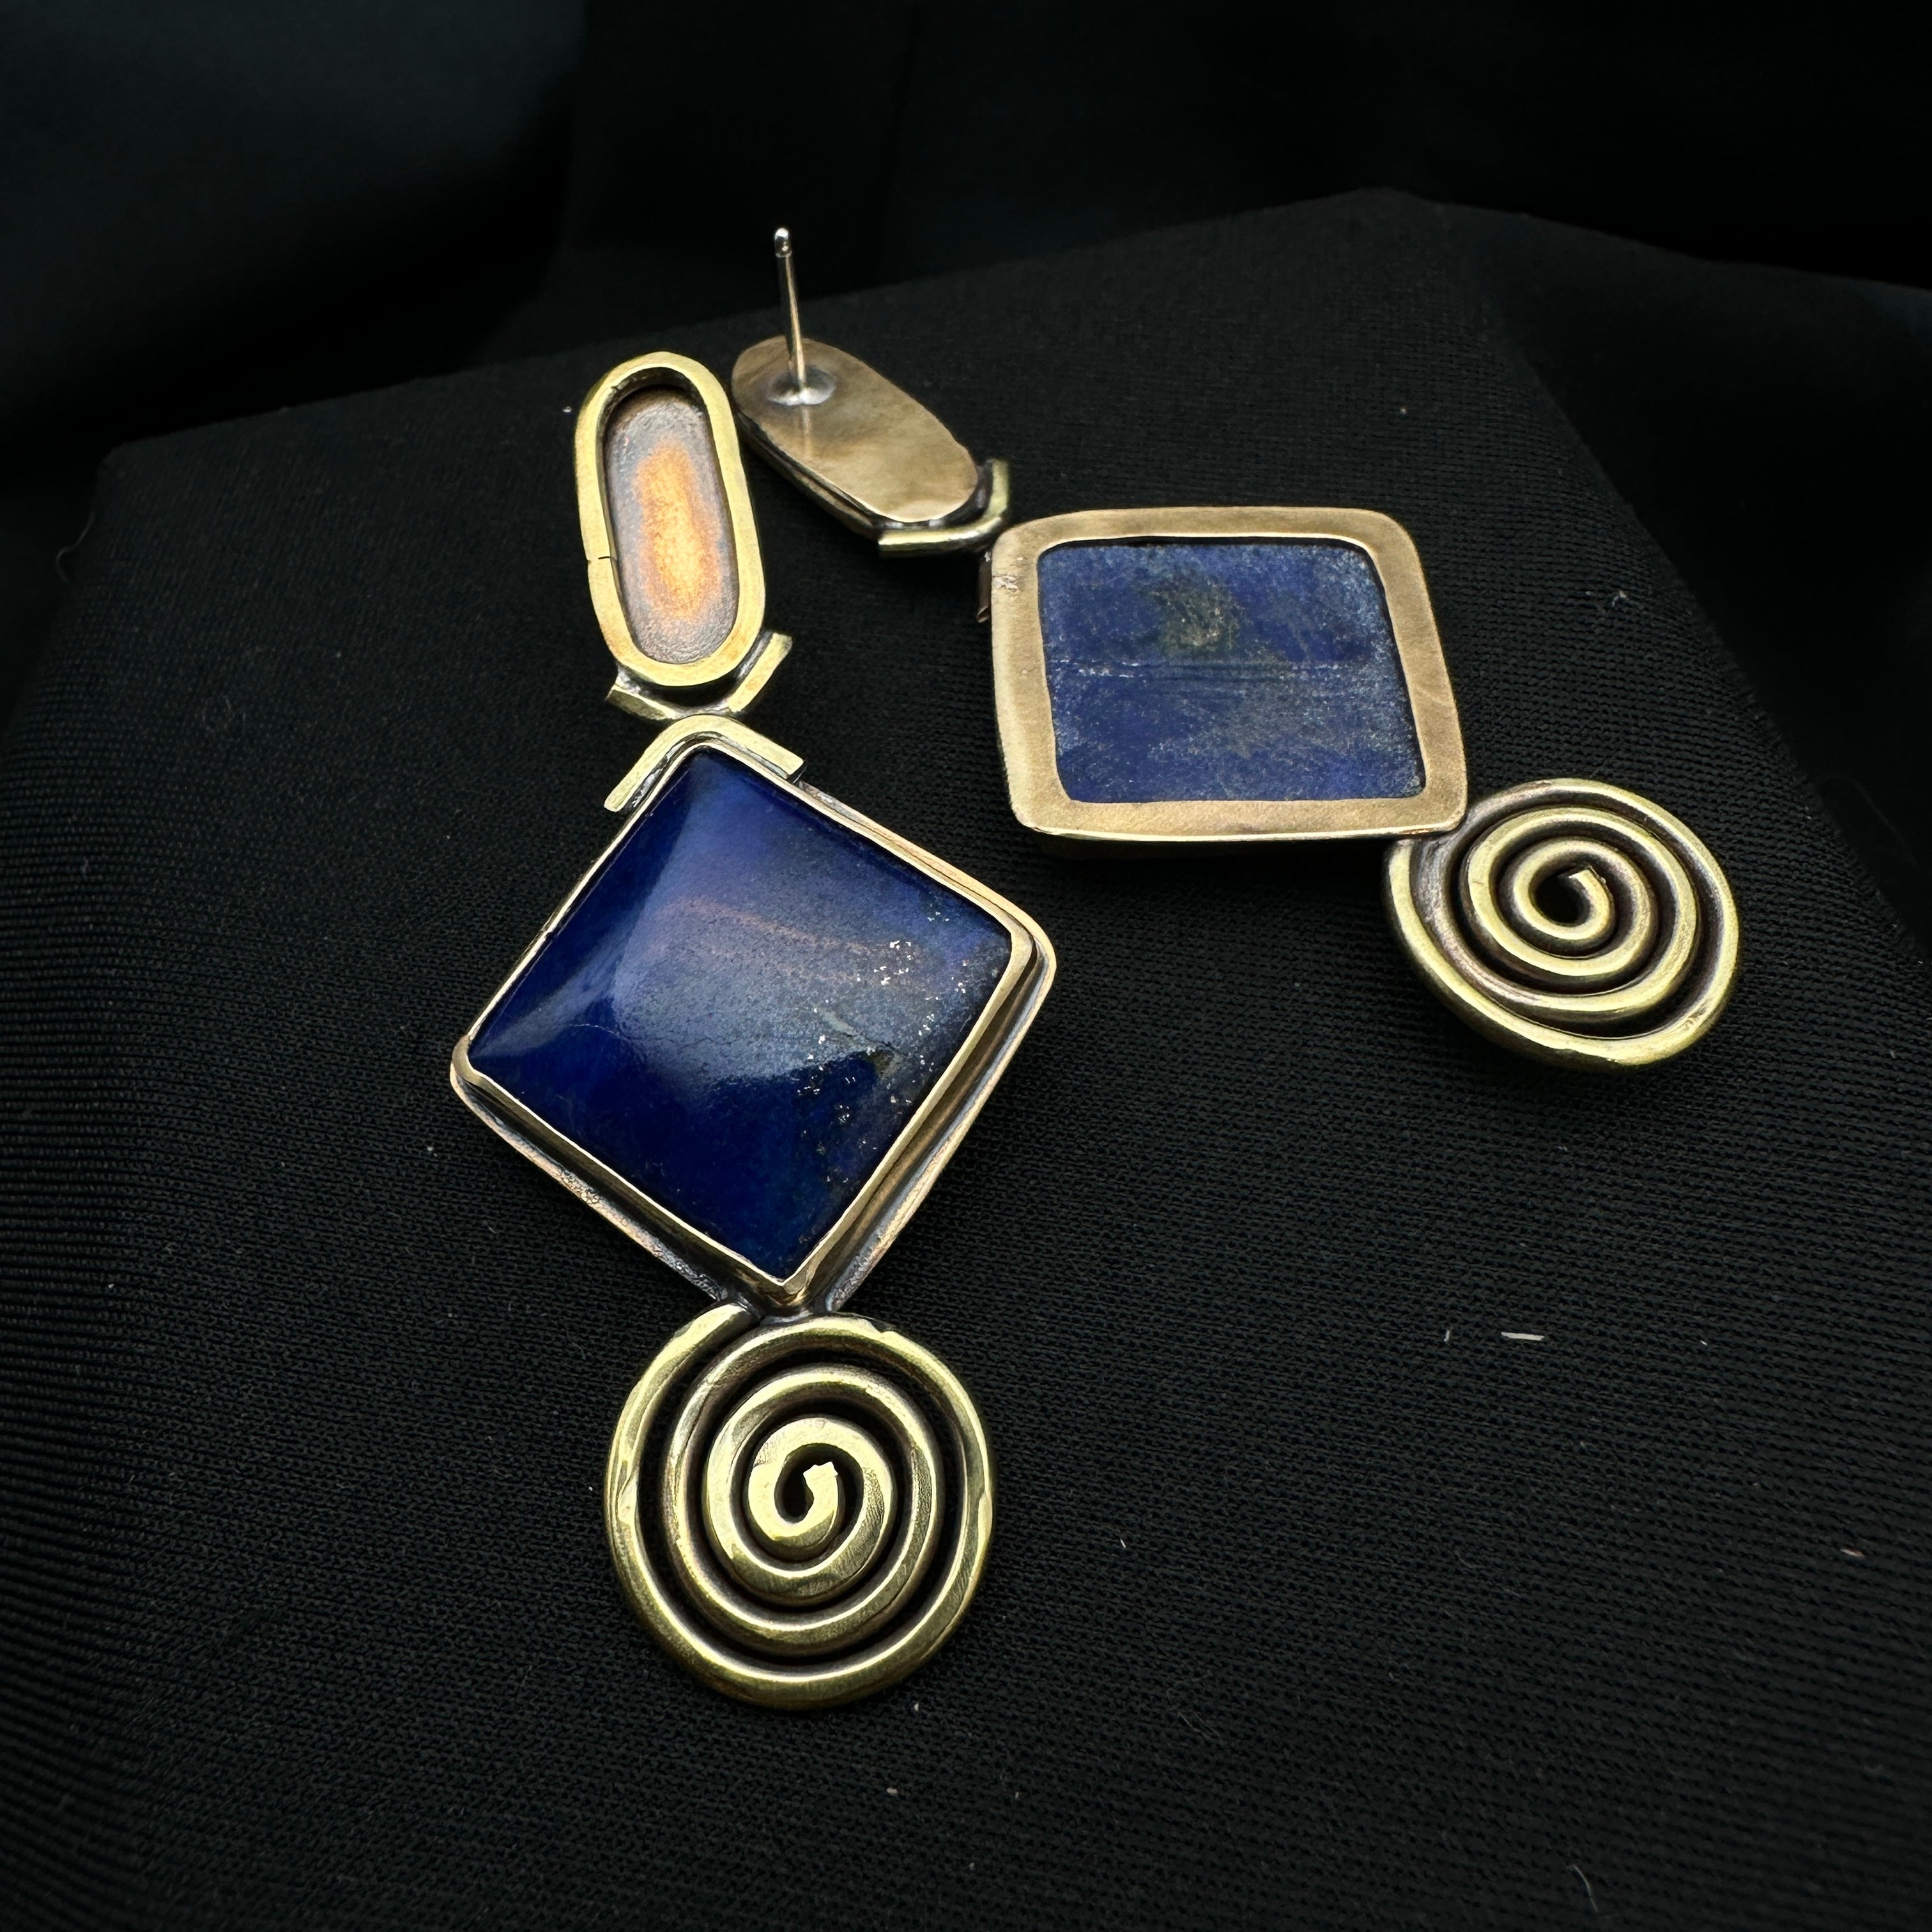 Spiraled Brass and Lapis Post Earrings